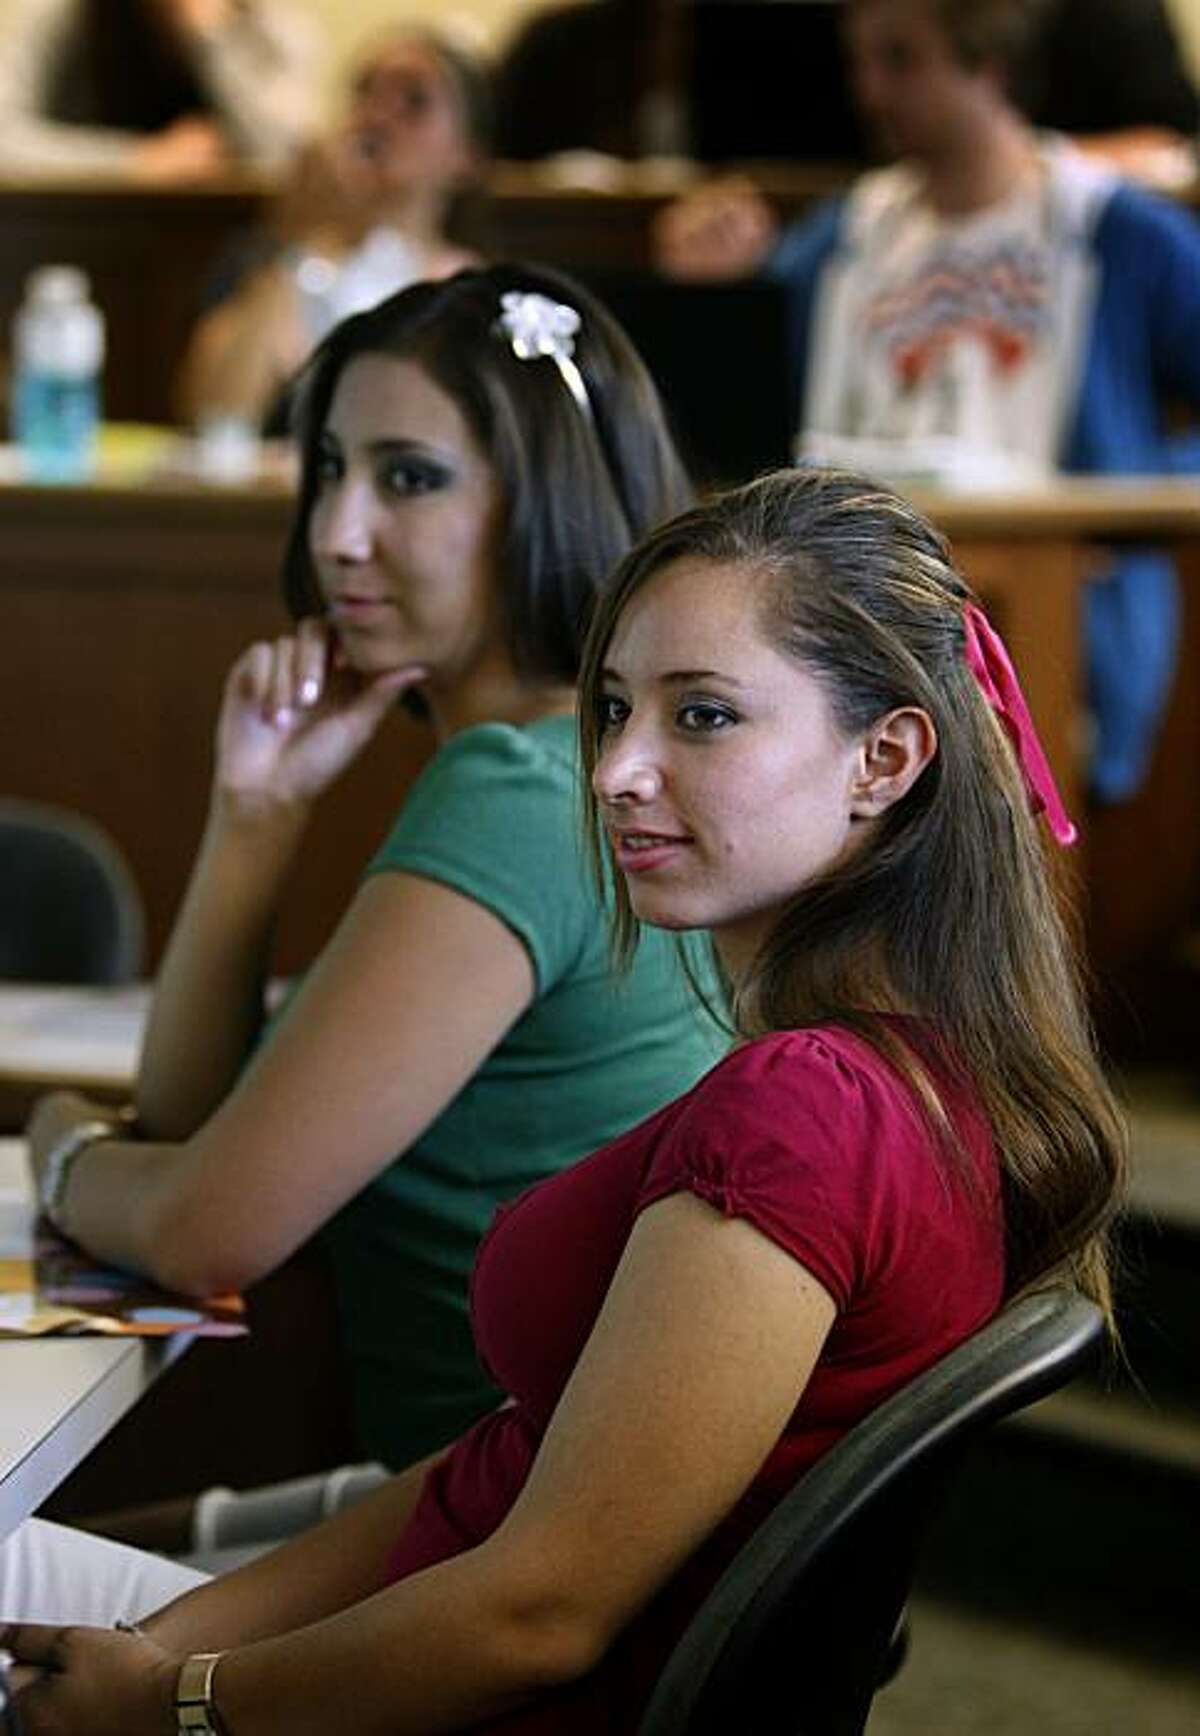 Cynthia Belez (left) and Rebeca Ponce attend a class on negotiation and conflict resolution at Cal in Berkeley, Calif., on Wednesday, June 30, 2010. Belez and Ponce are undergraduate students from Mexico taking summer classes at UC Berkeley, which has seen a spike in international students during the summer session.